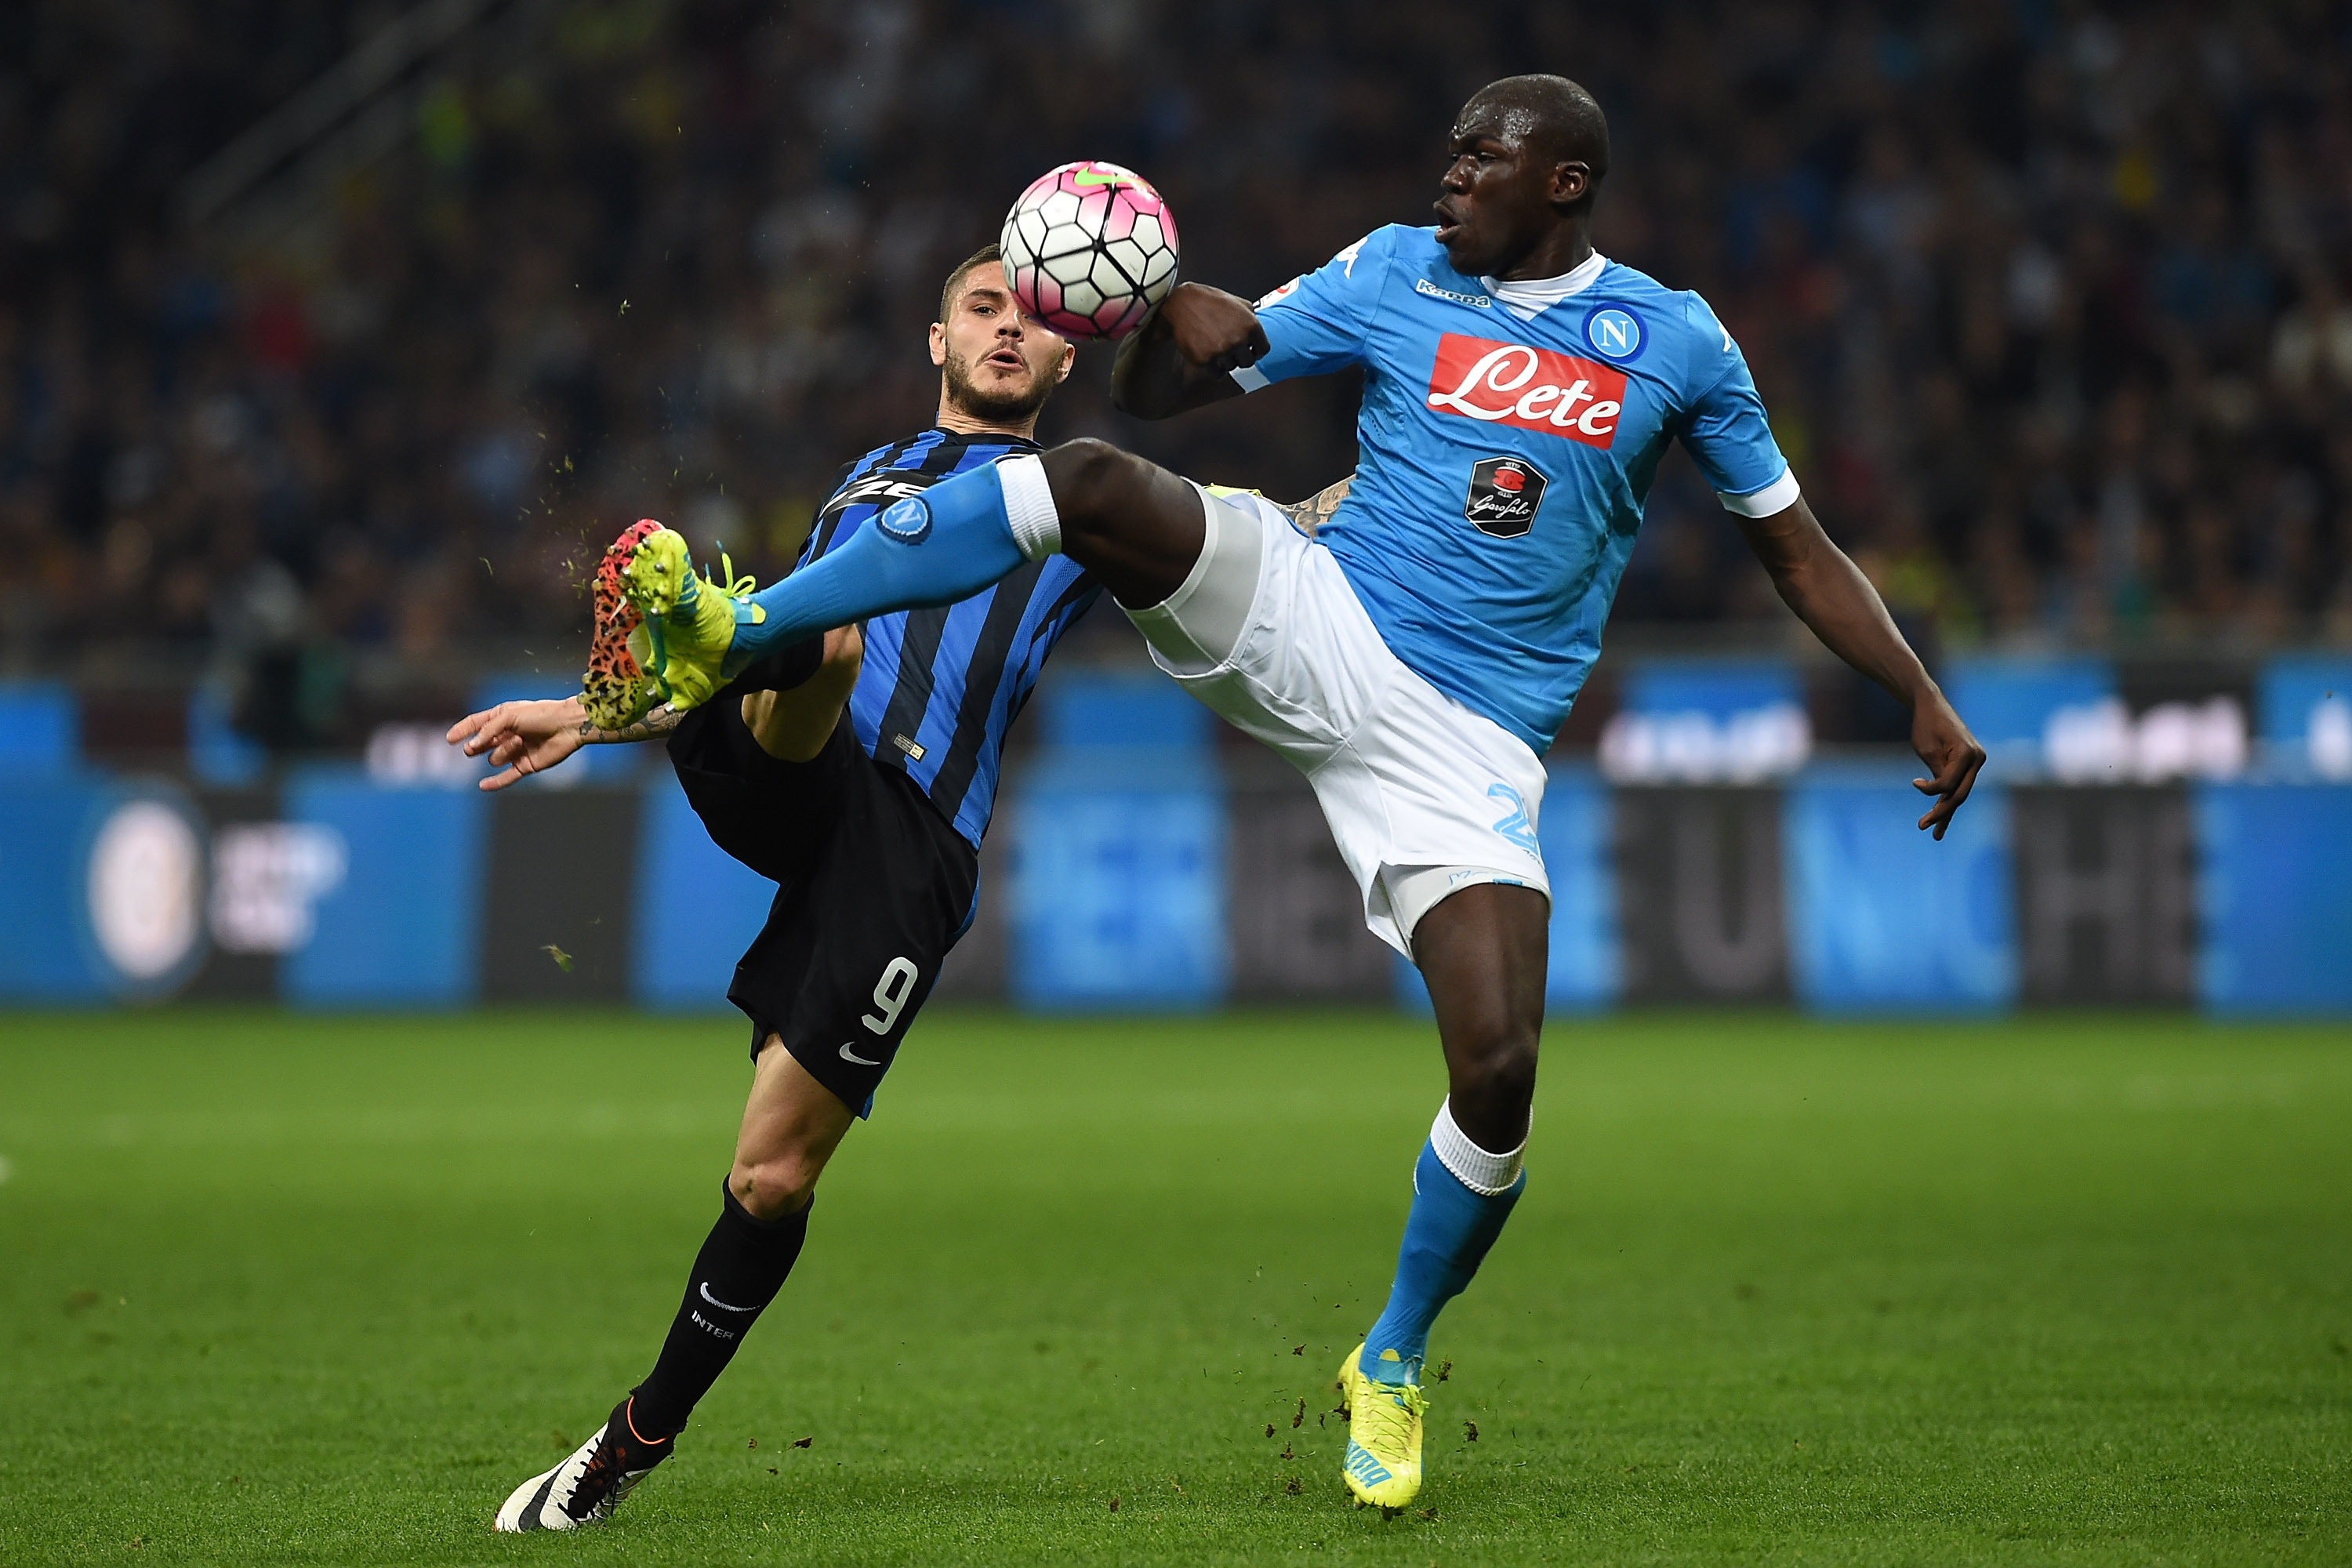 MILAN, ITALY - APRIL 16:  Mauro Icardi (L) of FC Internazionale Milano is challenged by Kalidou Koulibaly of SSC Napoli during the Serie A match between FC Internazionale Milano and SSC Napoli at Stadio Giuseppe Meazza on April 16, 2016 in Milan, Italy.  (Photo by Valerio Pennicino/Getty Images)